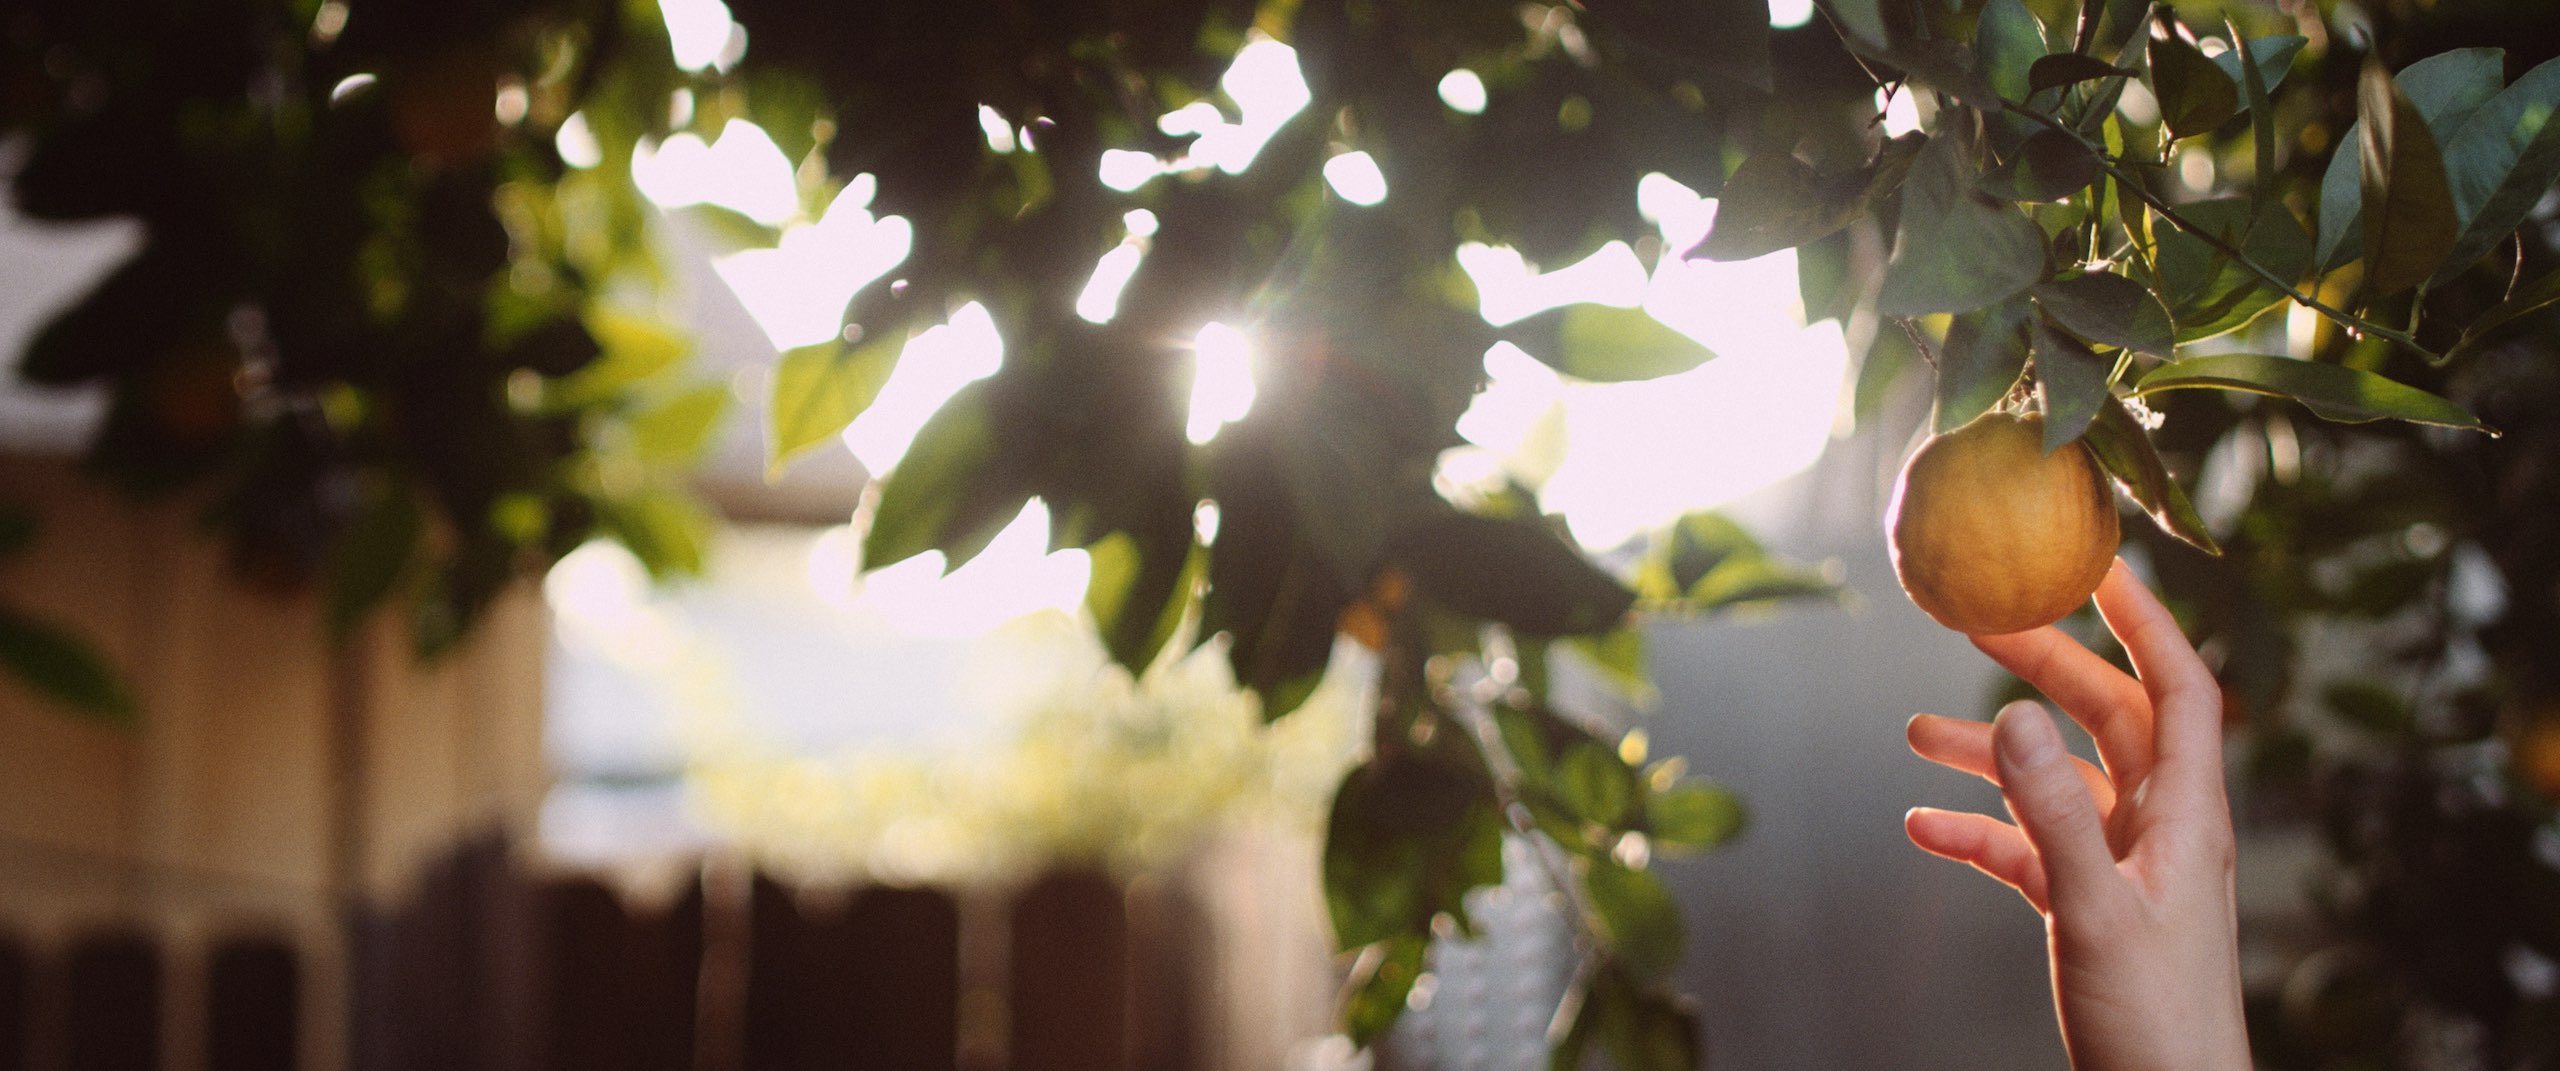 Grace From Above, A C&I Studios Original Short Film Hand picking an orange from a tree with sun filtering through